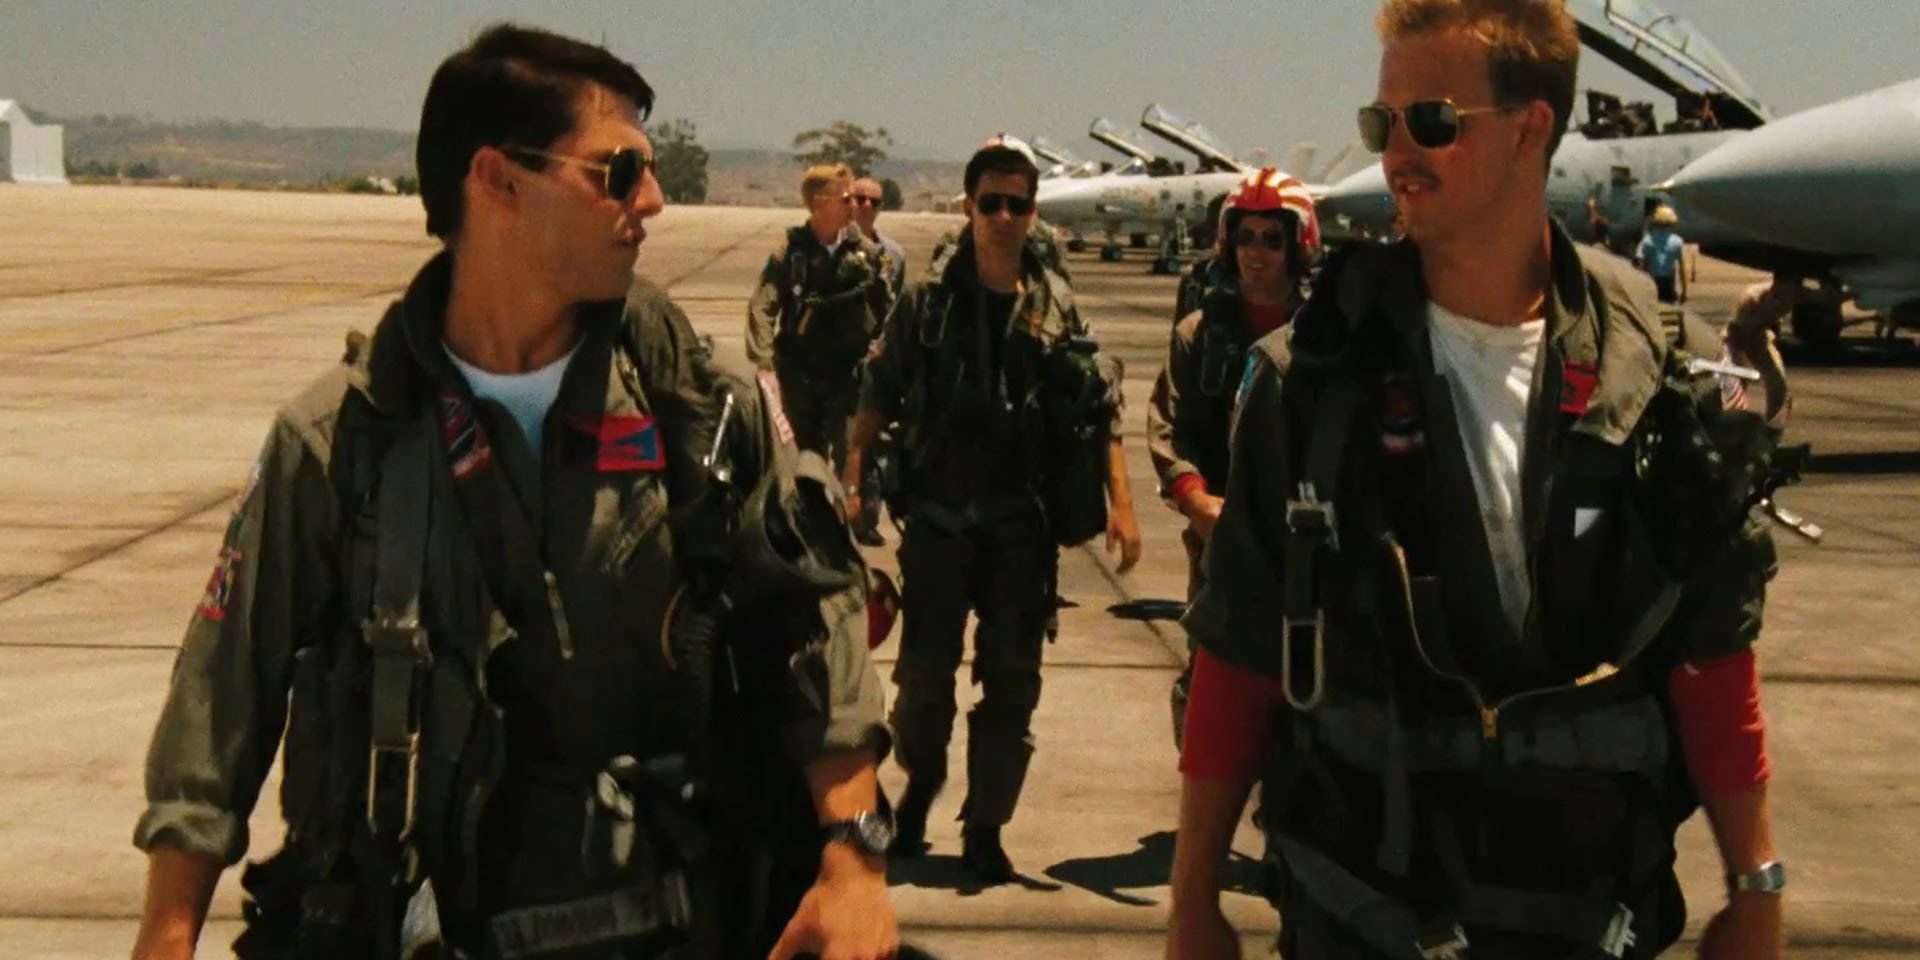 Top Gun 10 Questions Weve Waited Over 30 Years For A Sequel To Answer